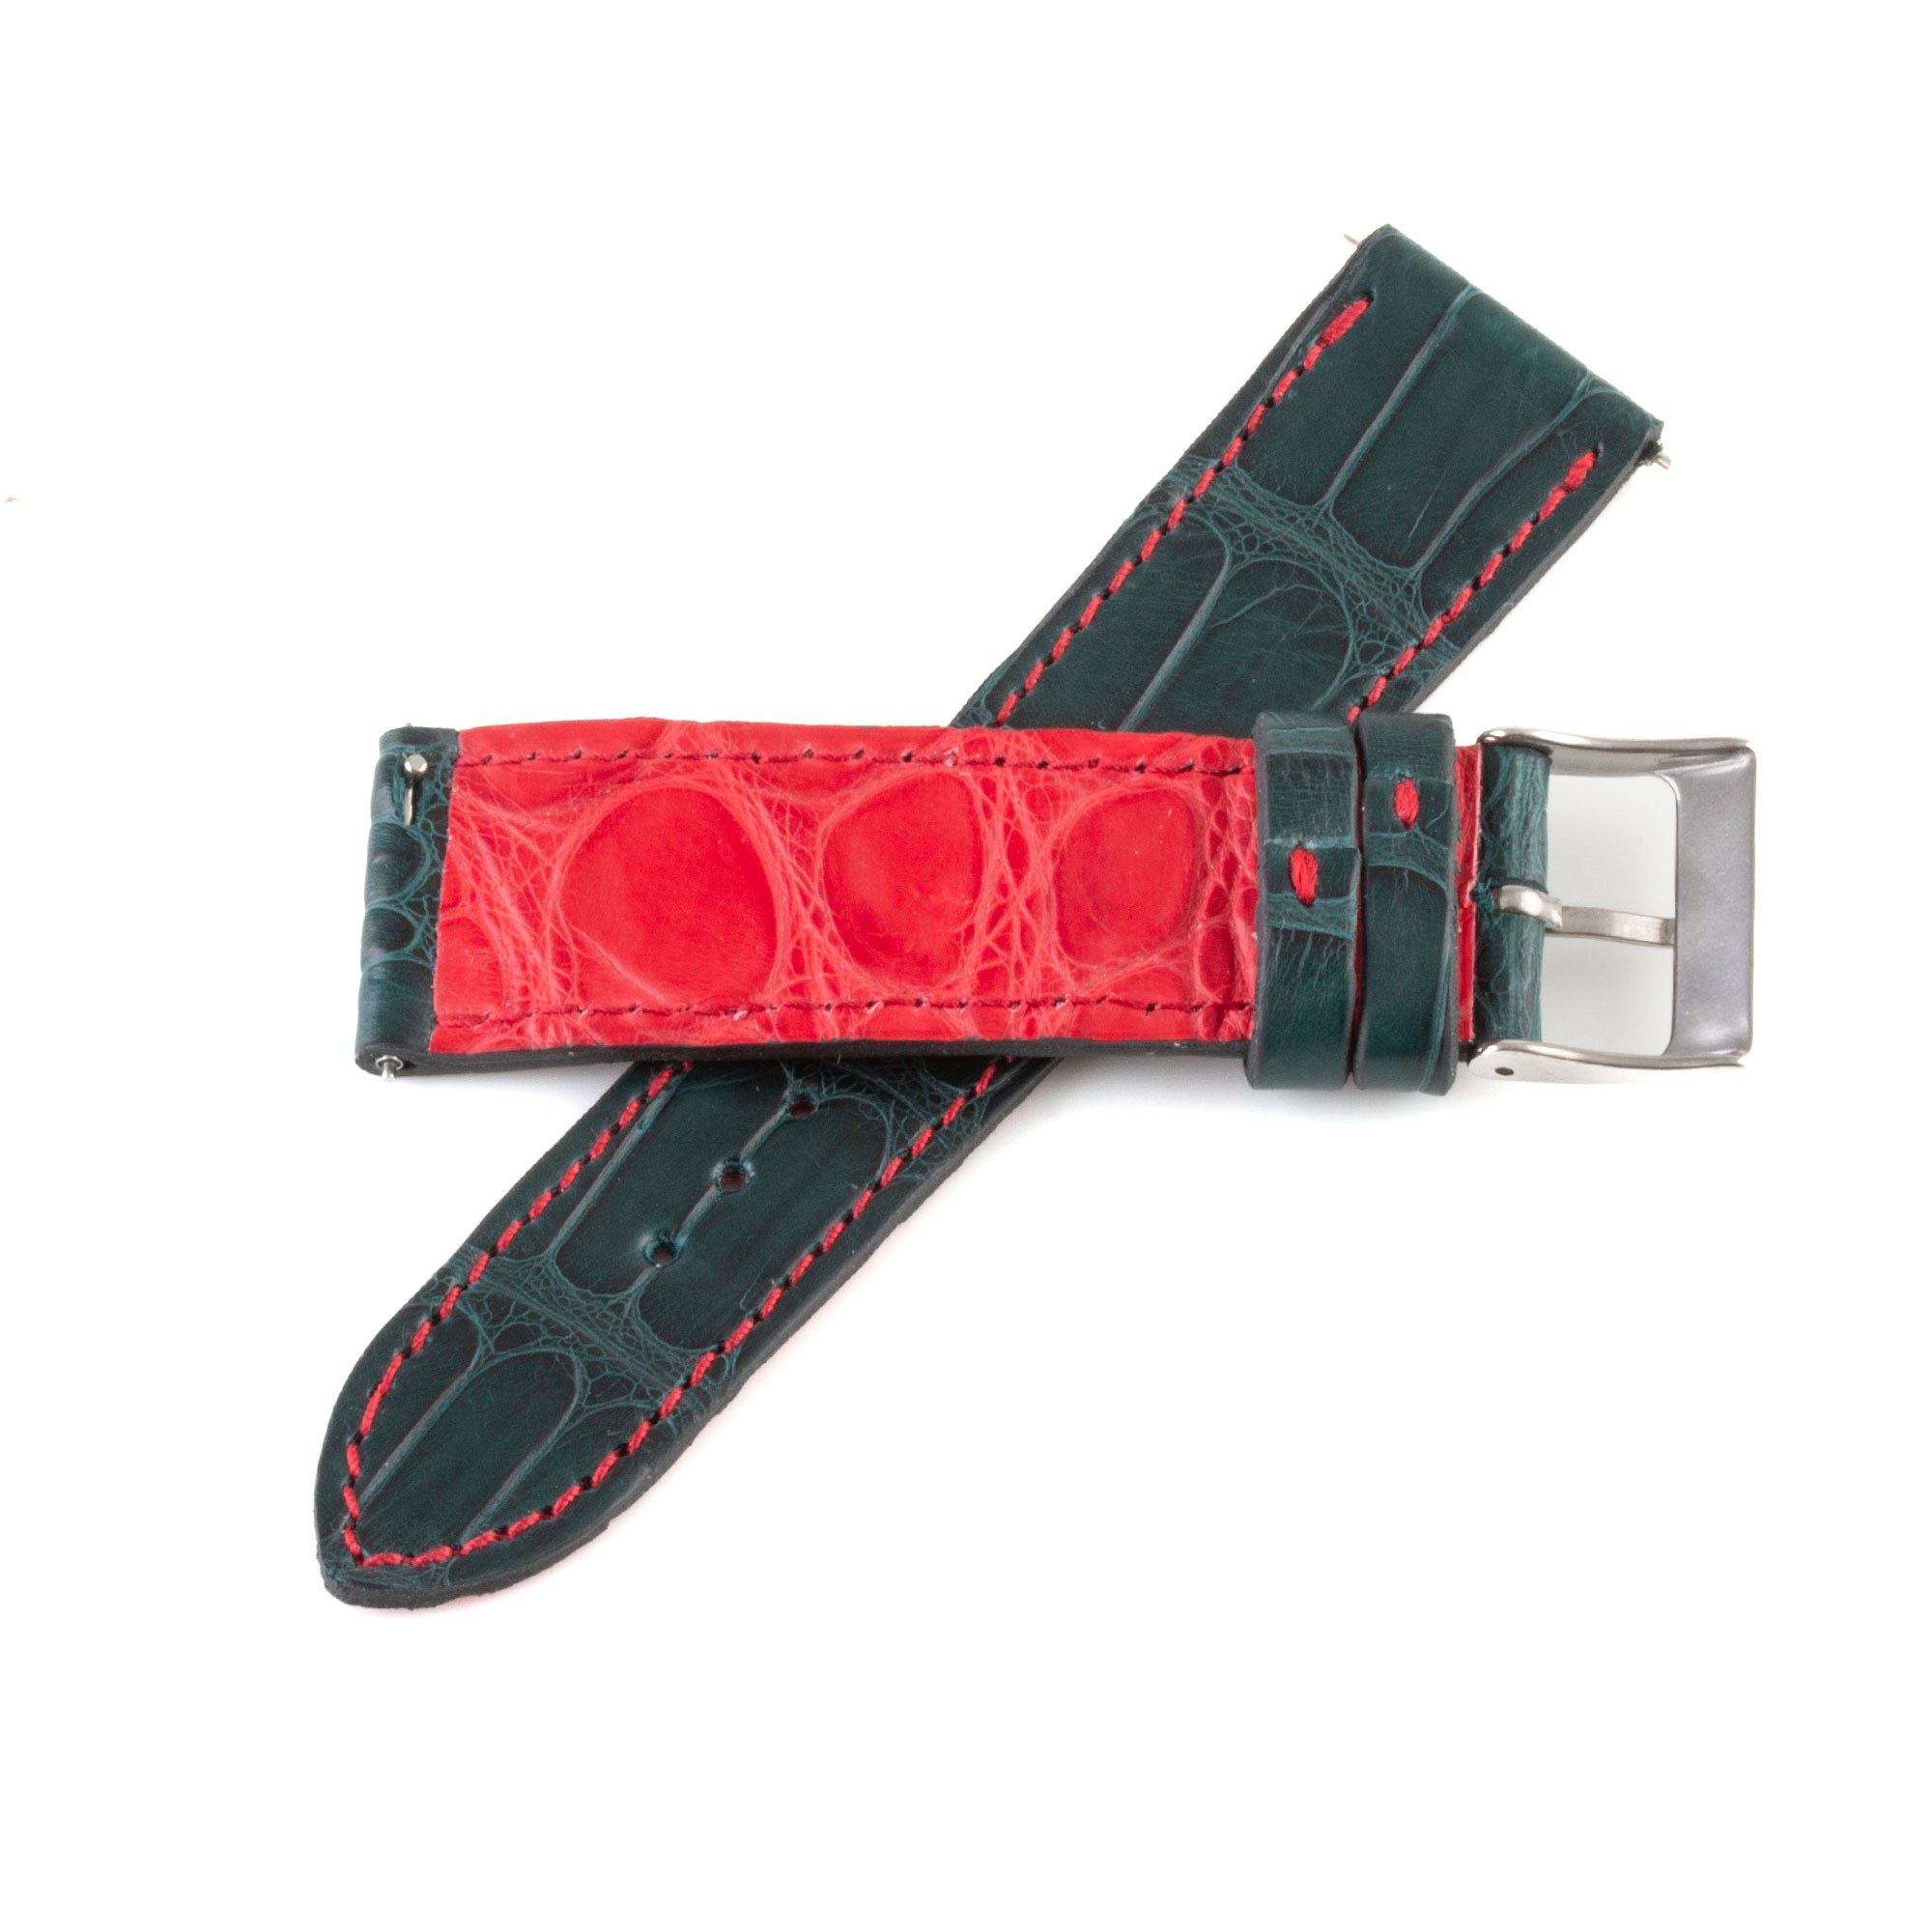 Alligator "Solo" leather watch band - 21mm width (0.83 inches) / Size M (n° 4)